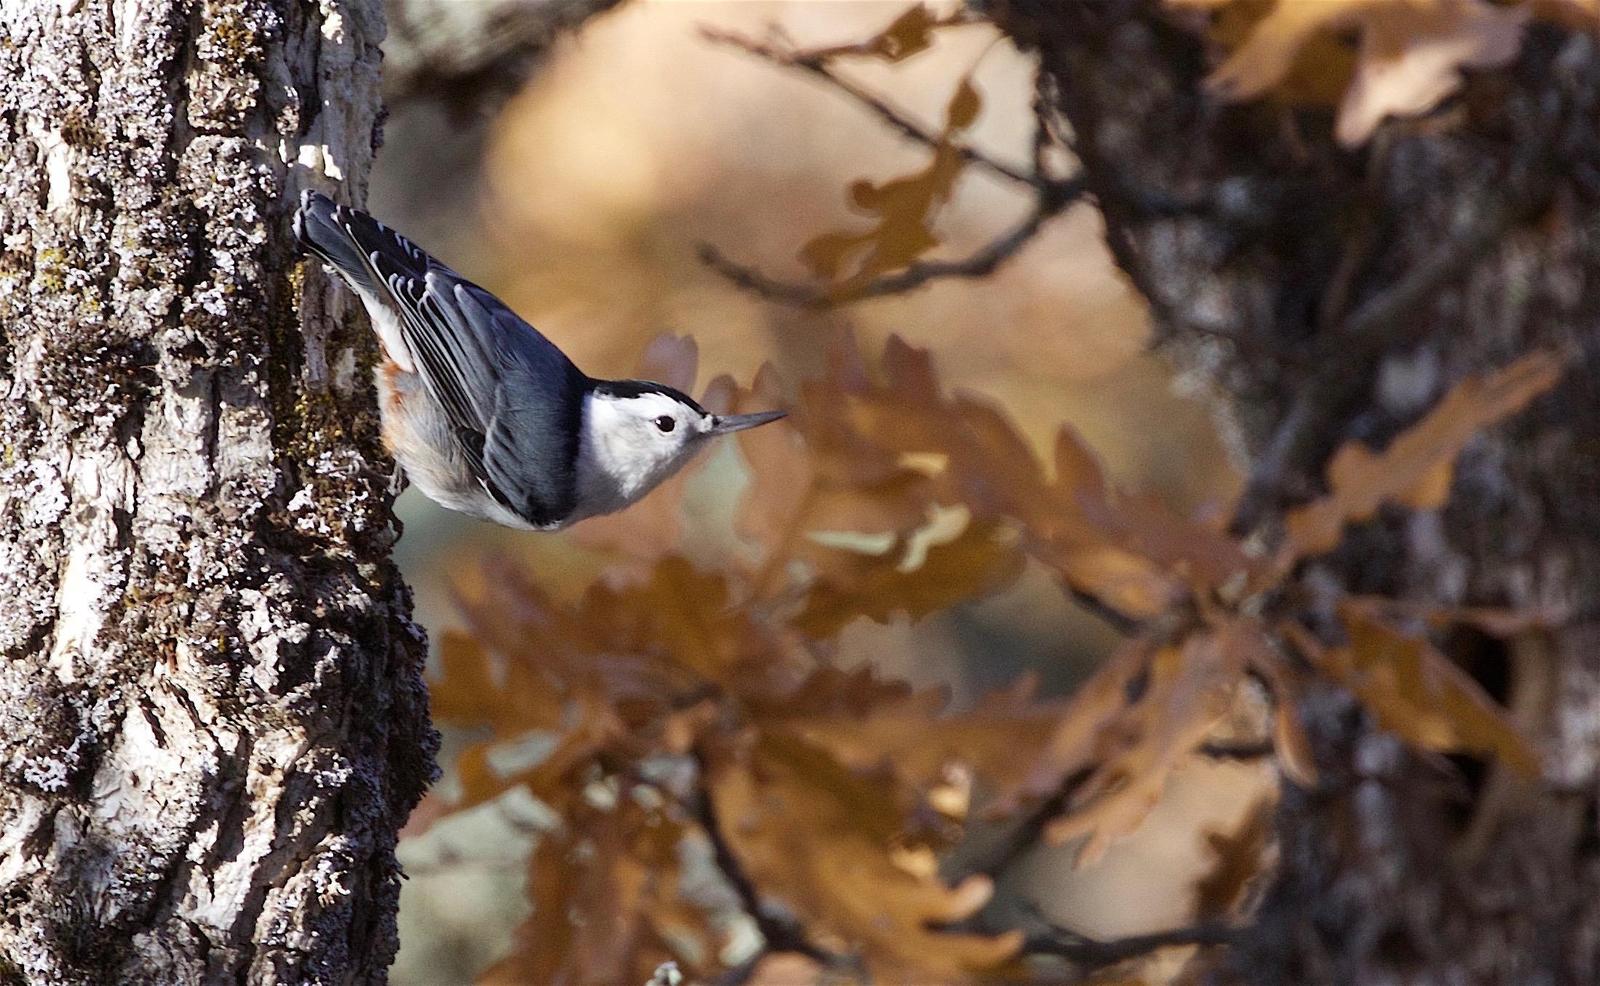 White-breasted Nuthatch Photo by Kathryn Keith